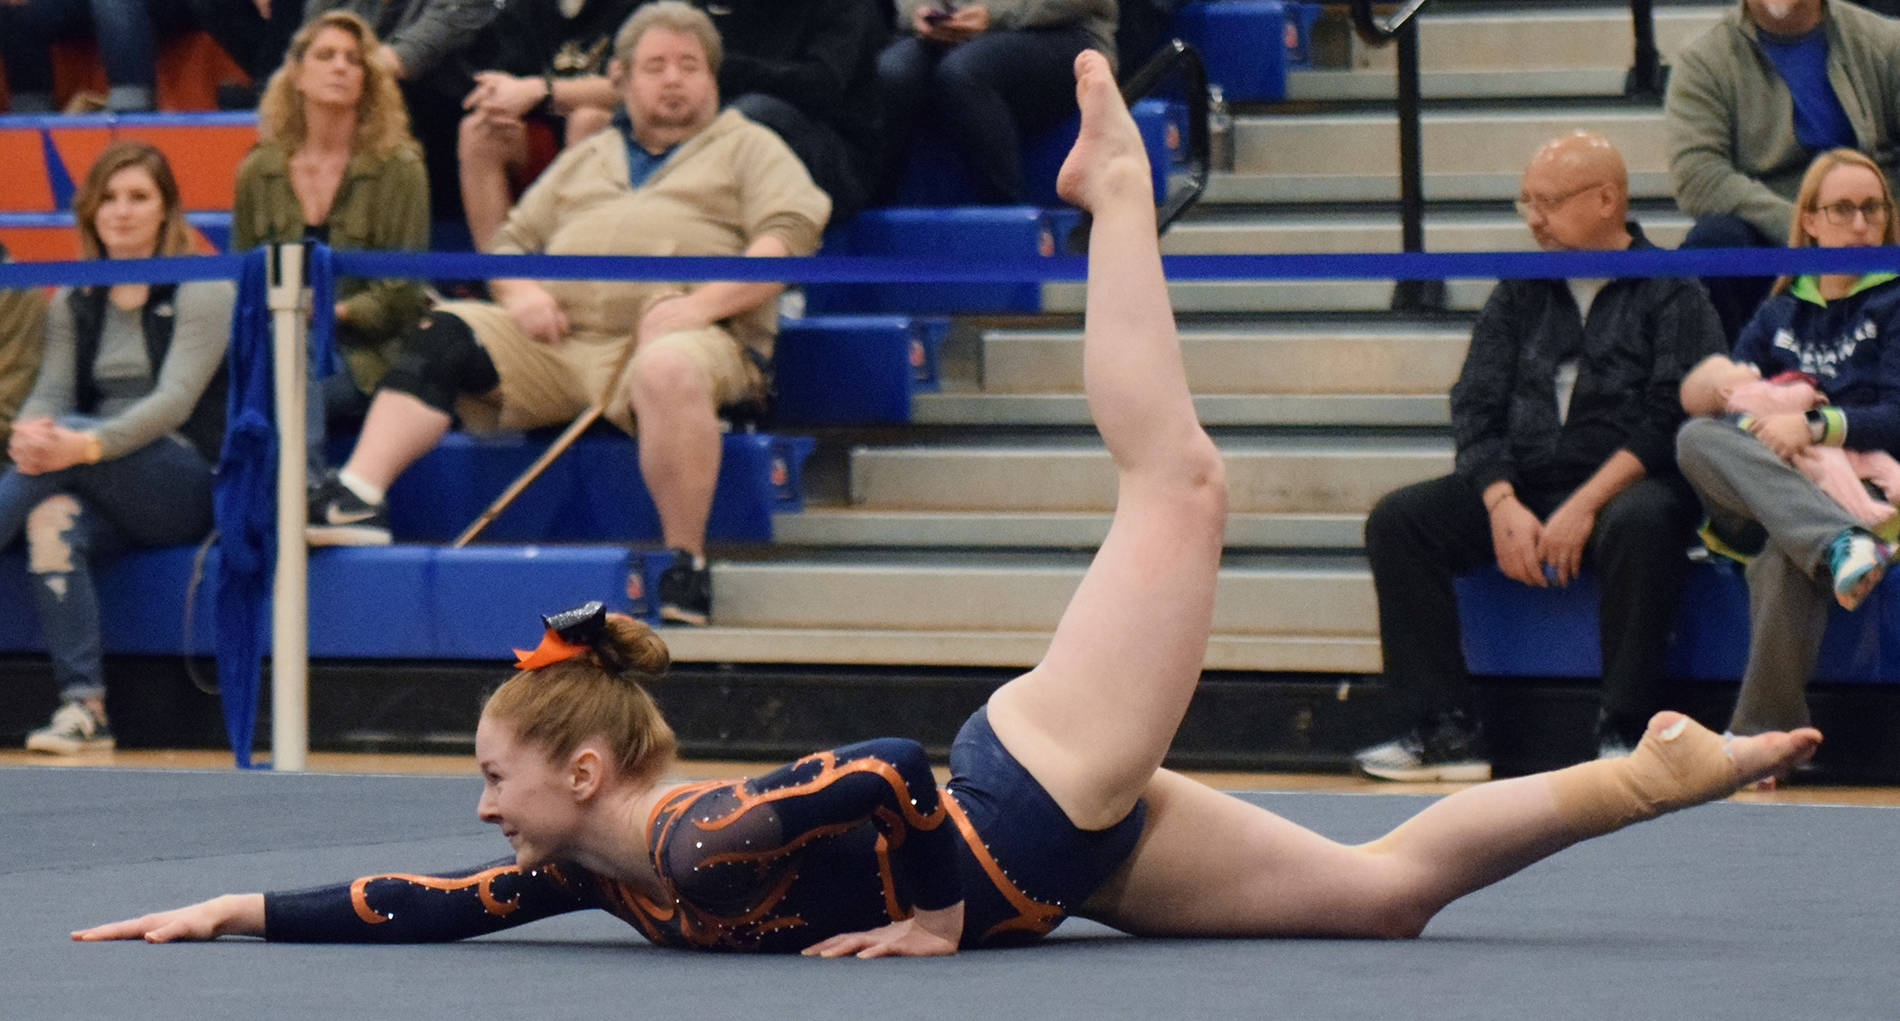 Auburn Mountainview’s Regan Singer performs her routine on the floor during the 4A West Central District finals Saturday. Singer scored a 9.0, adding to the Lions’ state-qualifying team score. RACHEL CIAMPI, Auburn Reporter